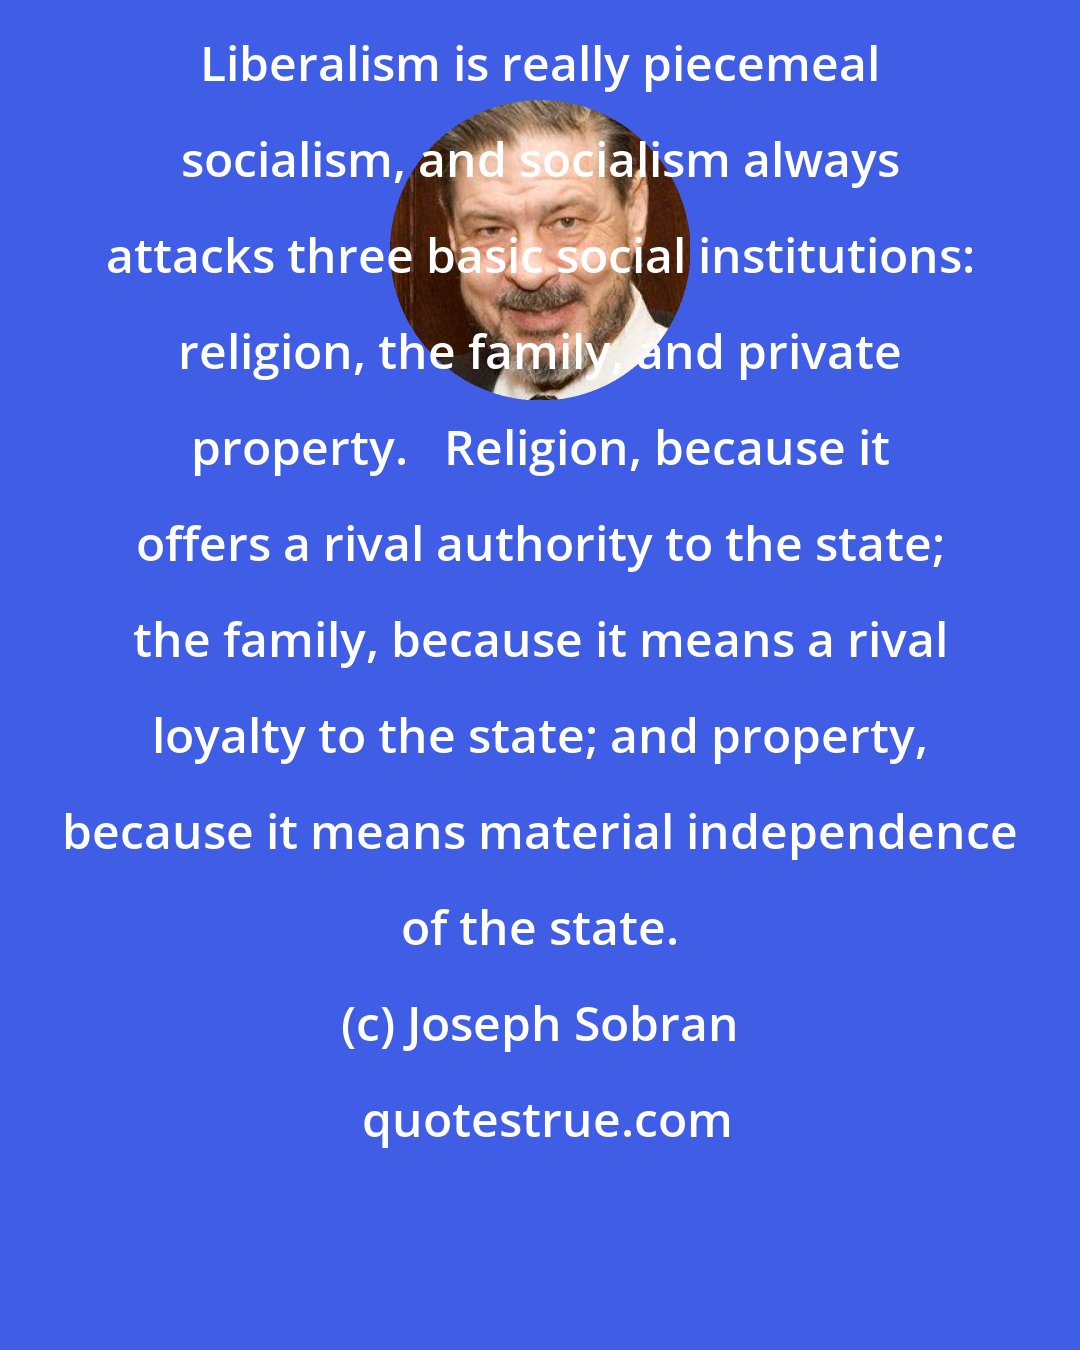 Joseph Sobran: Liberalism is really piecemeal socialism, and socialism always attacks three basic social institutions: religion, the family, and private property.   Religion, because it offers a rival authority to the state; the family, because it means a rival loyalty to the state; and property, because it means material independence of the state.